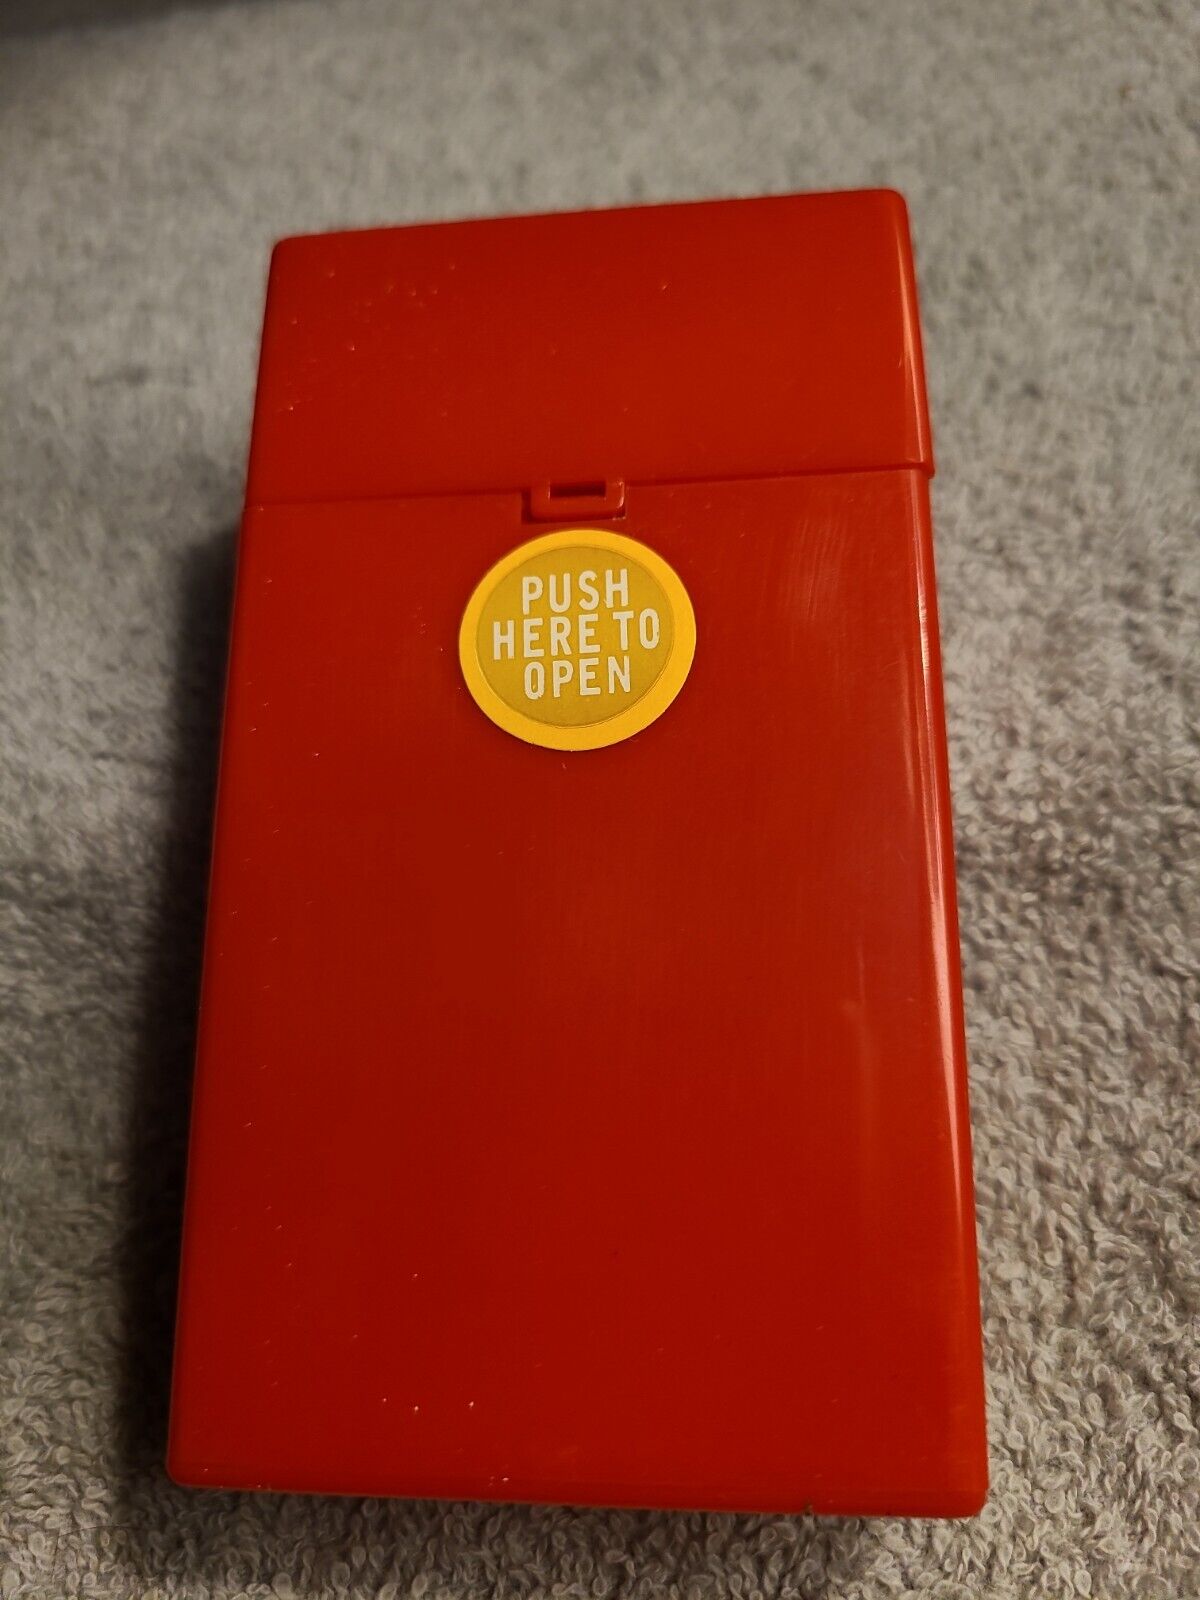 Eclipse Red 100s Size Push To Open Button Cigarette Case 